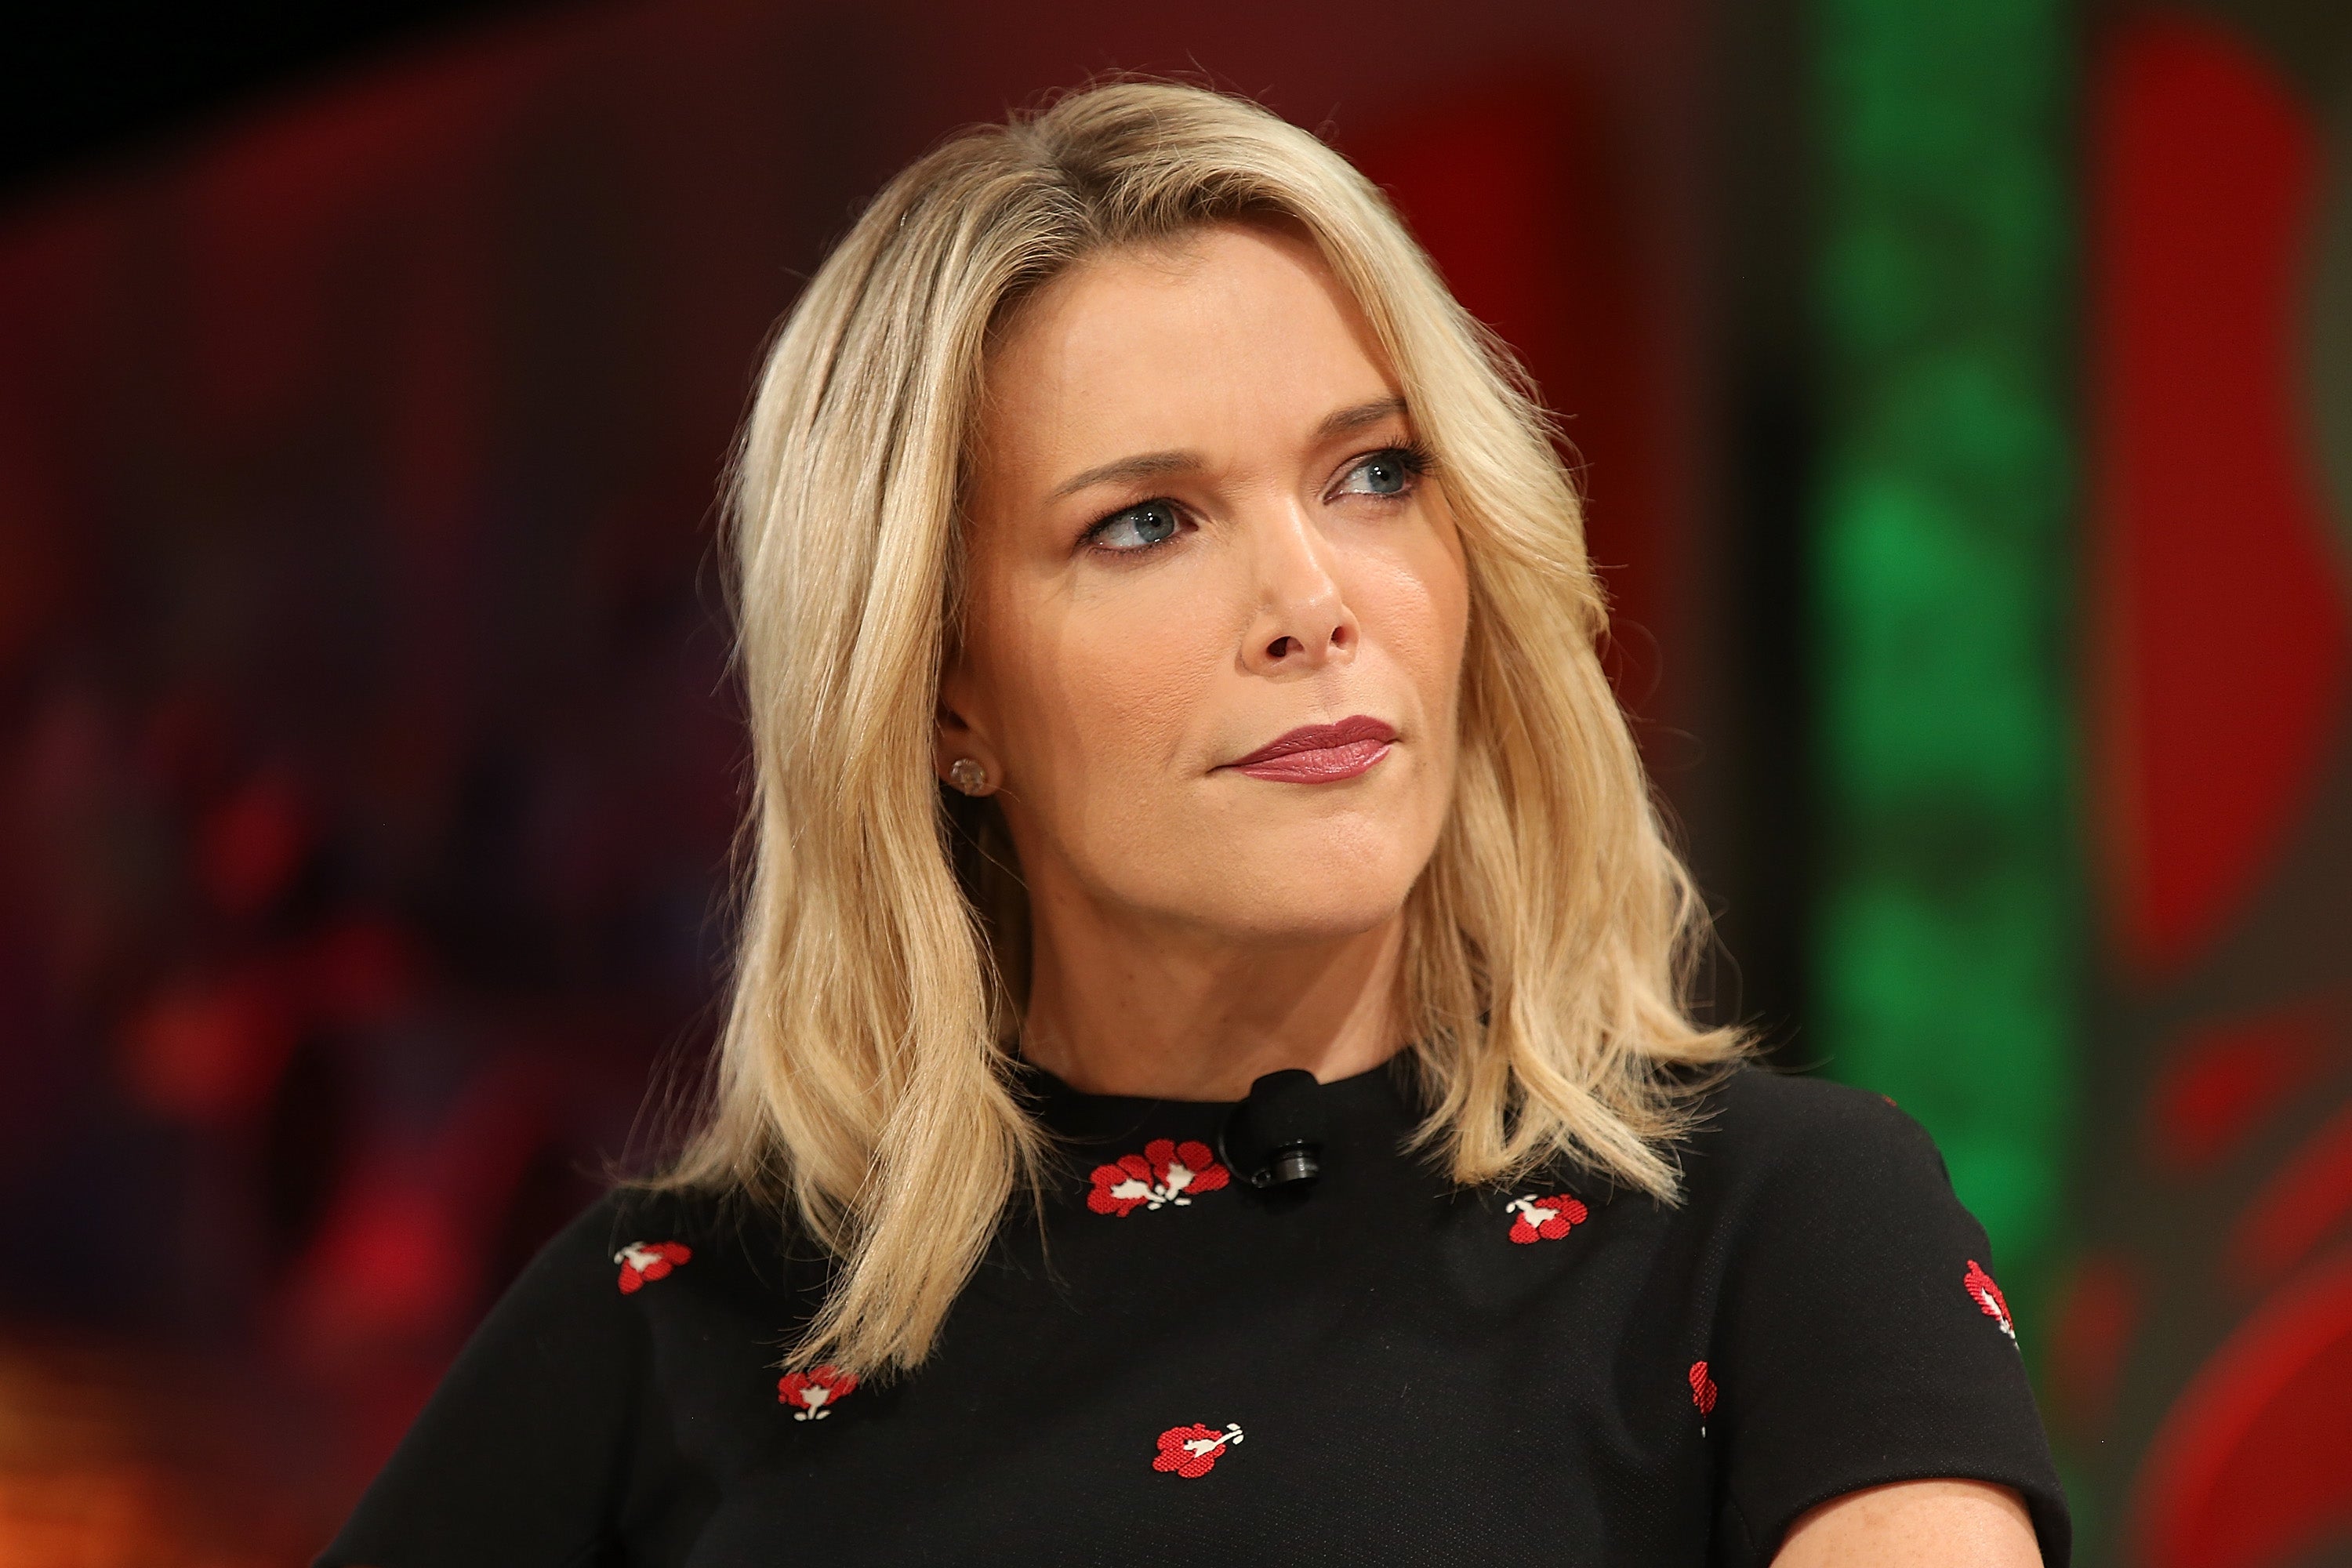 Megyn Kelly addresses her 2018 blackface comments in the first episode of her self-funded podcast